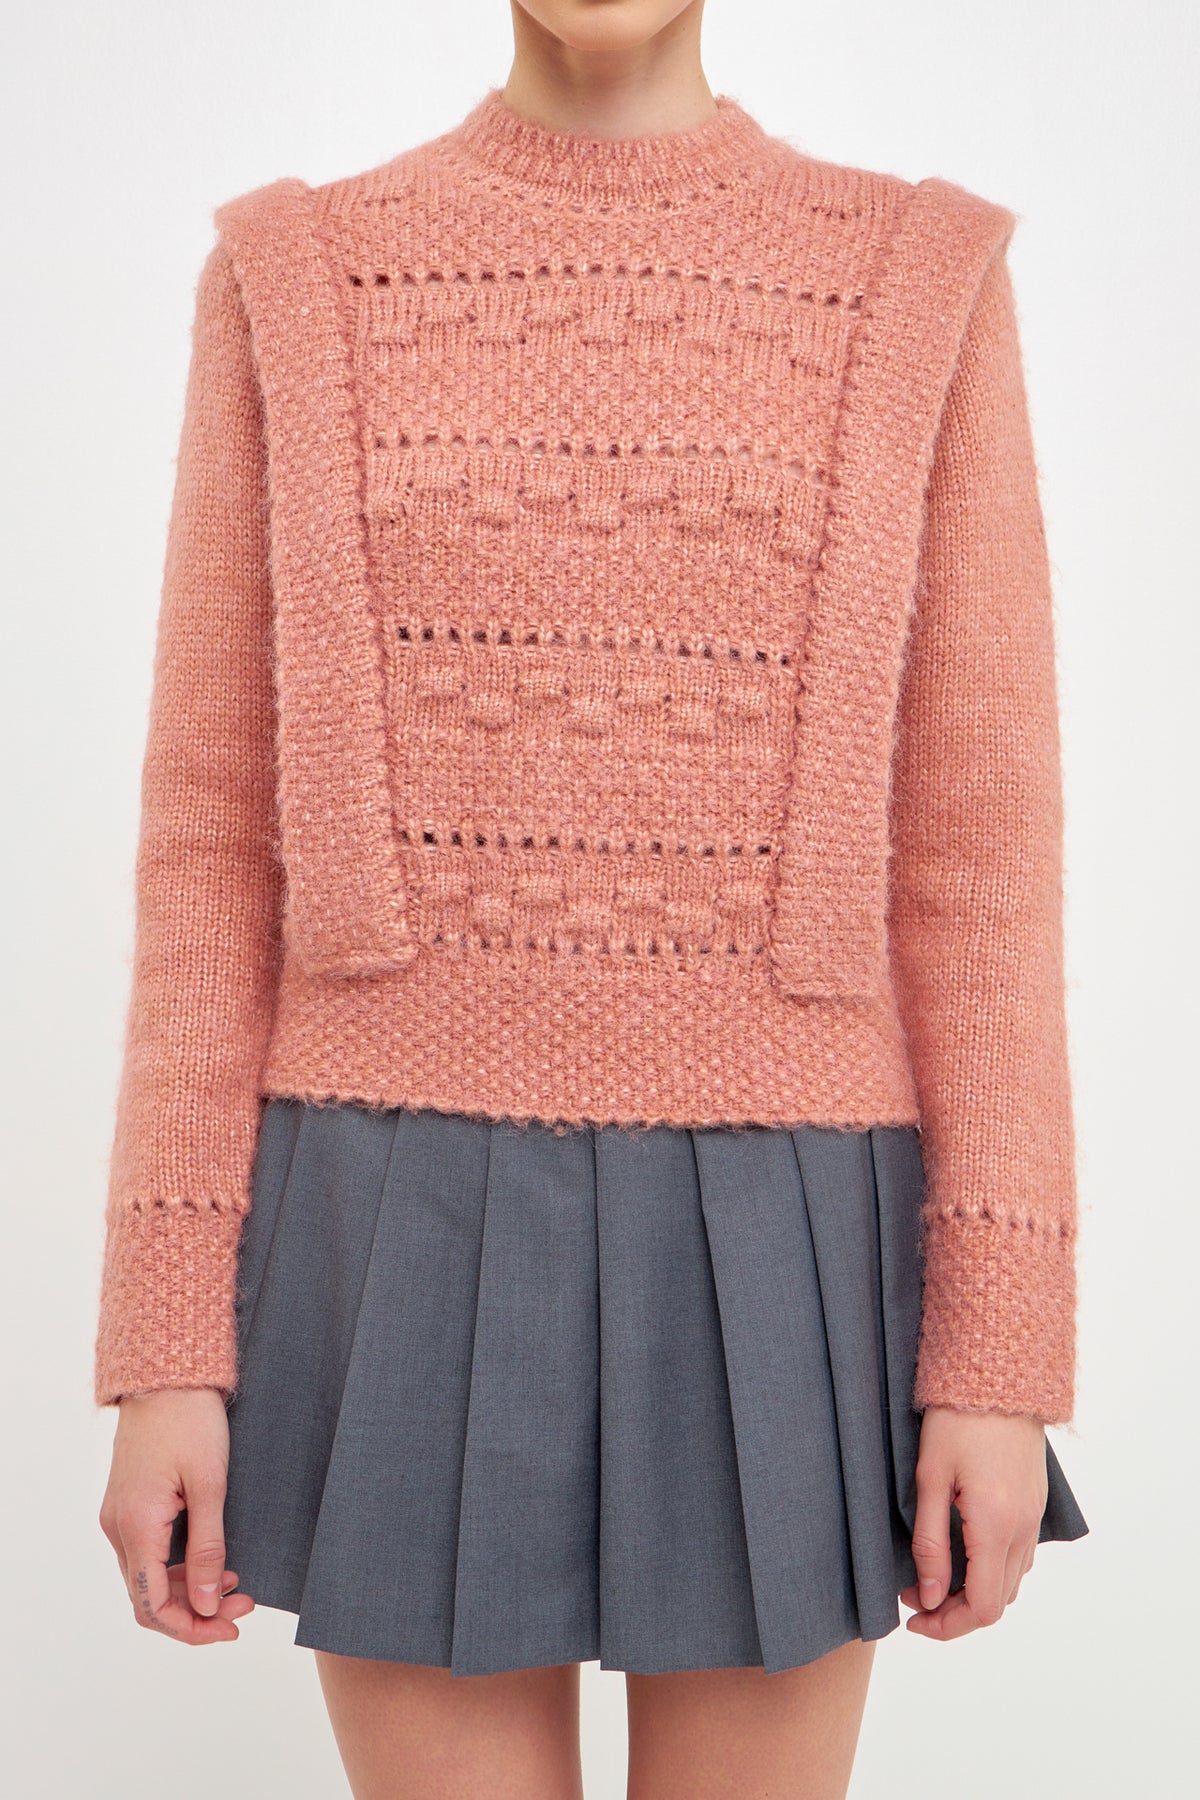 ENDLESS ROSE - Chunky Wool Knit Detailed Sweater - SWEATERS & KNITS available at Objectrare